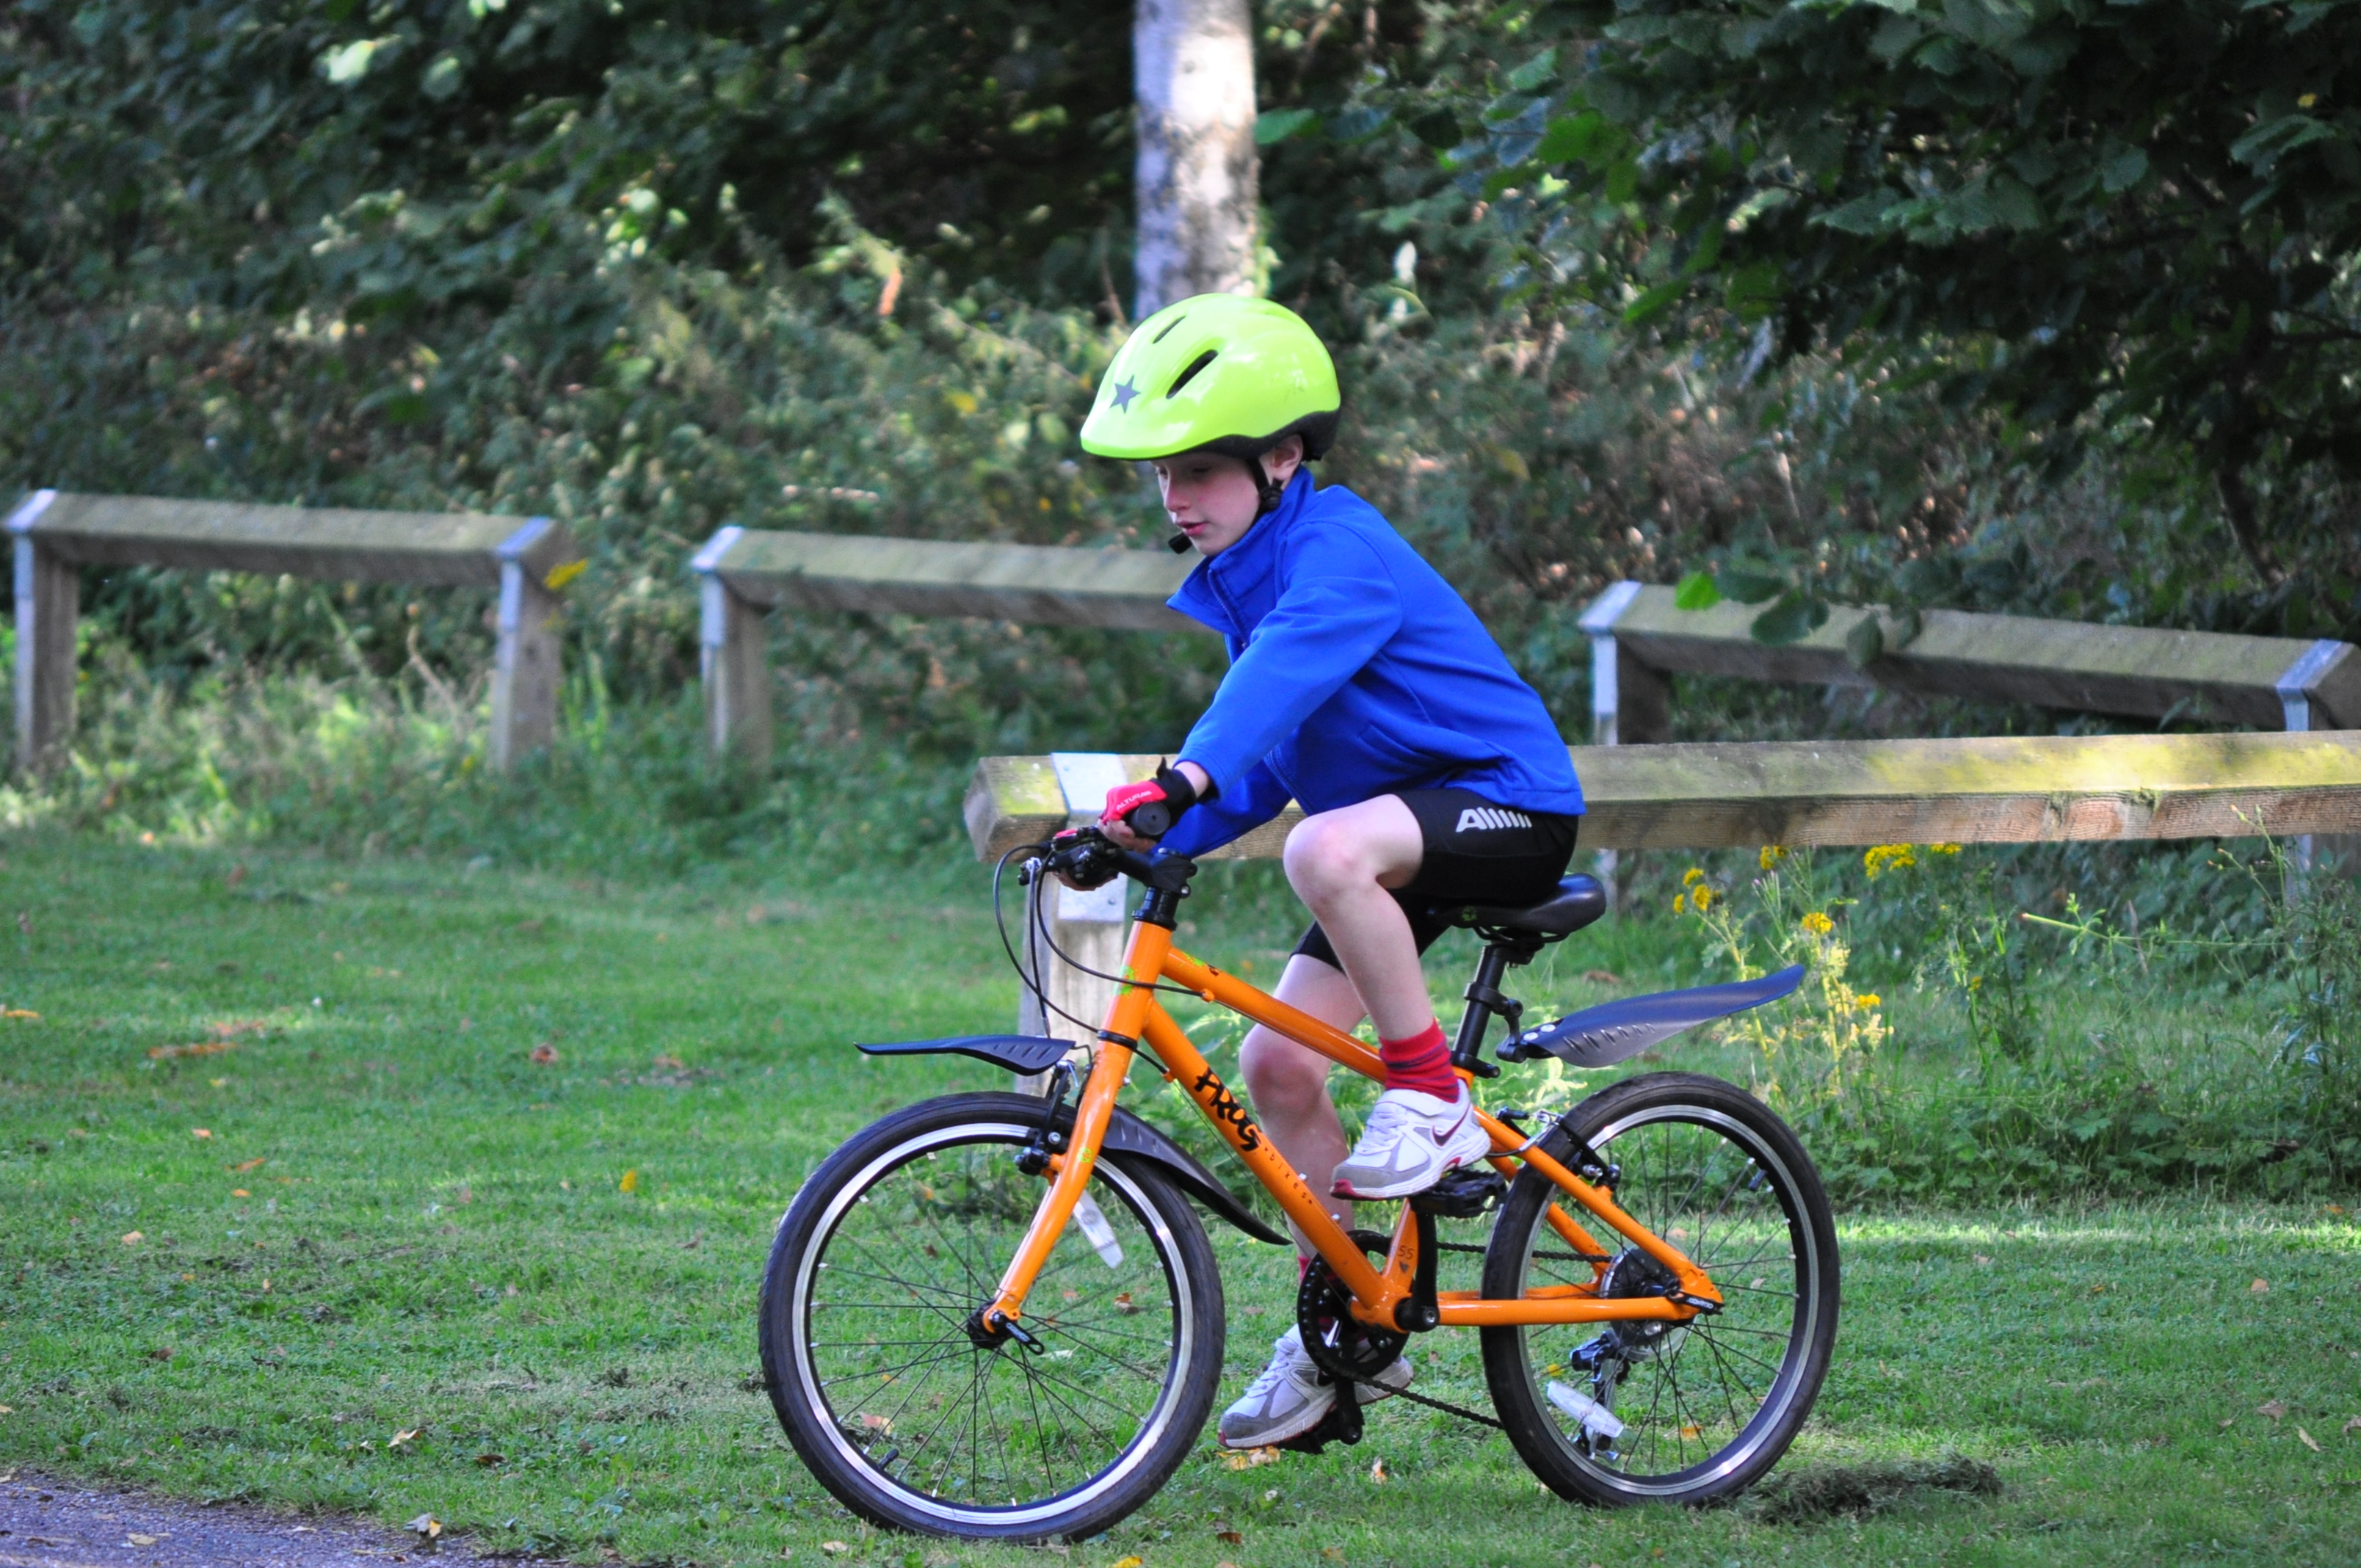 Frog 55 review - a quality kids bike